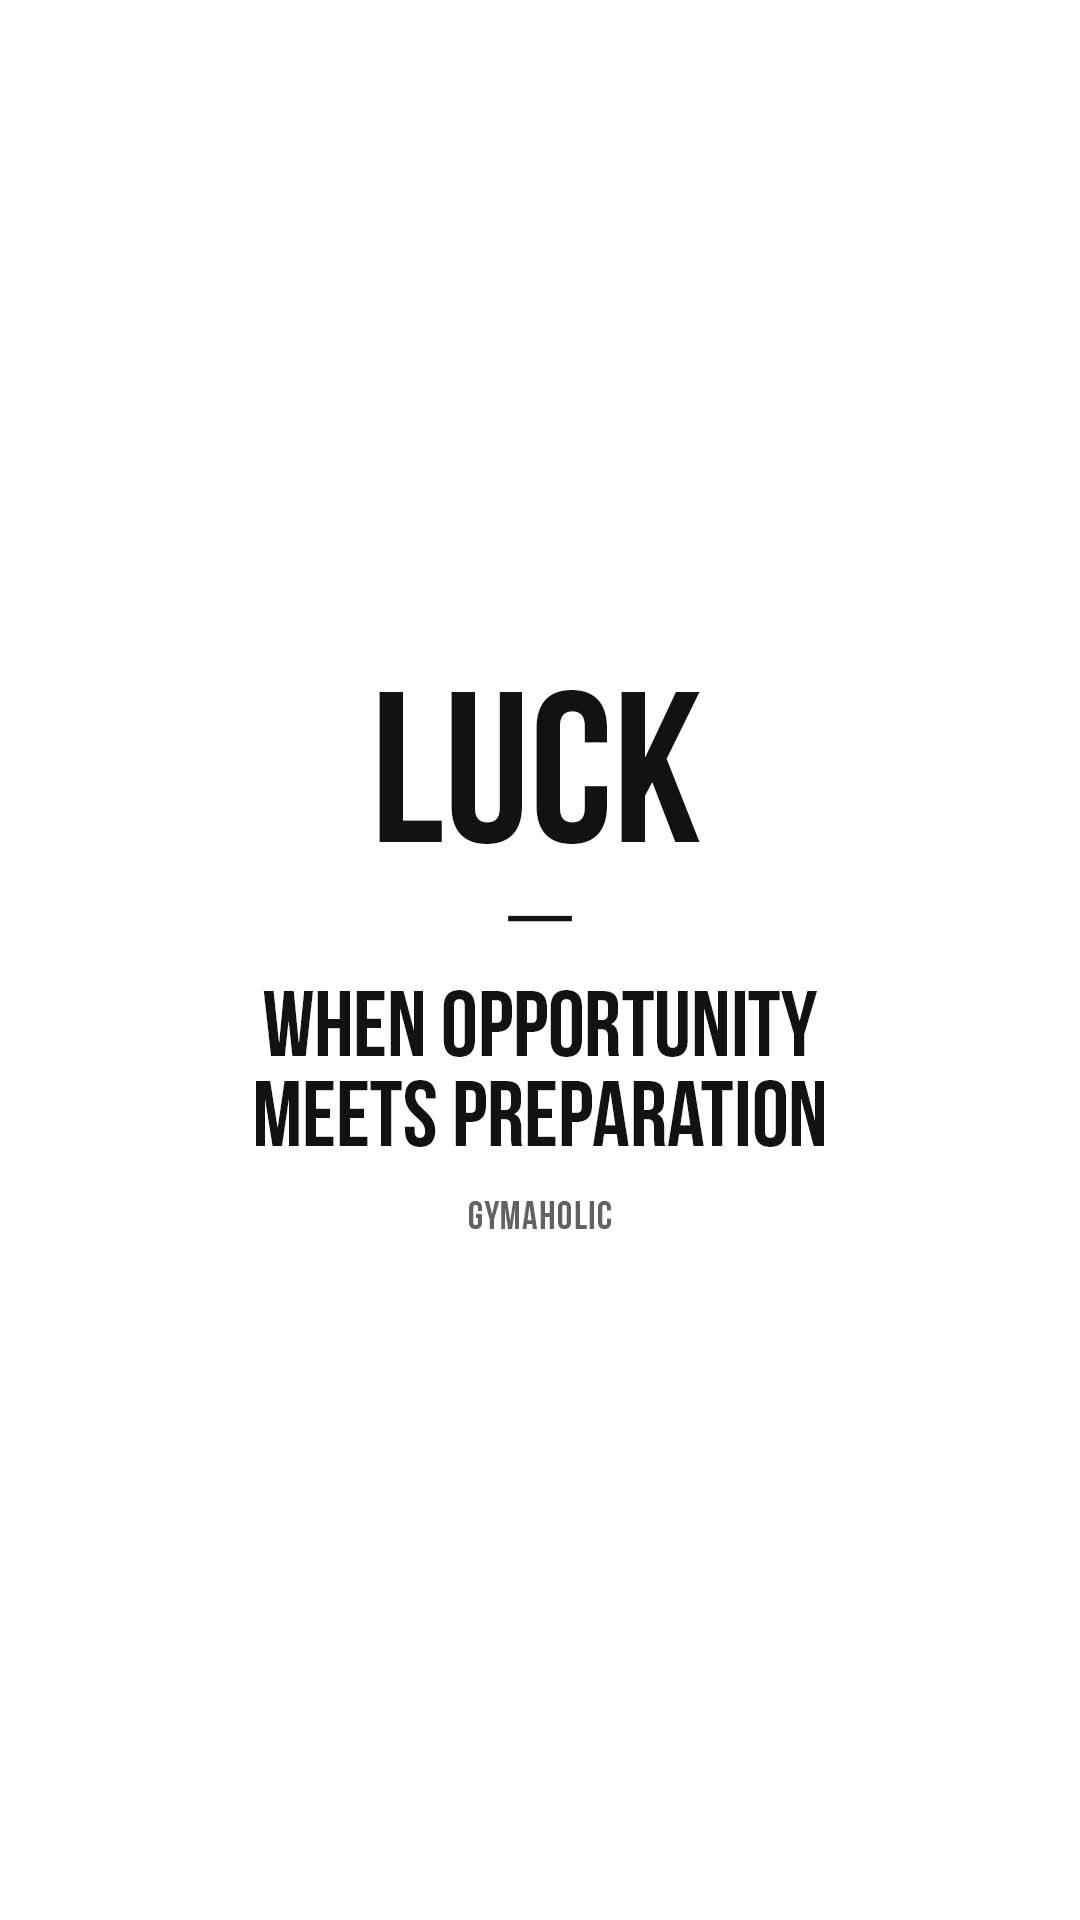 Luck: when opportunity meets preparation